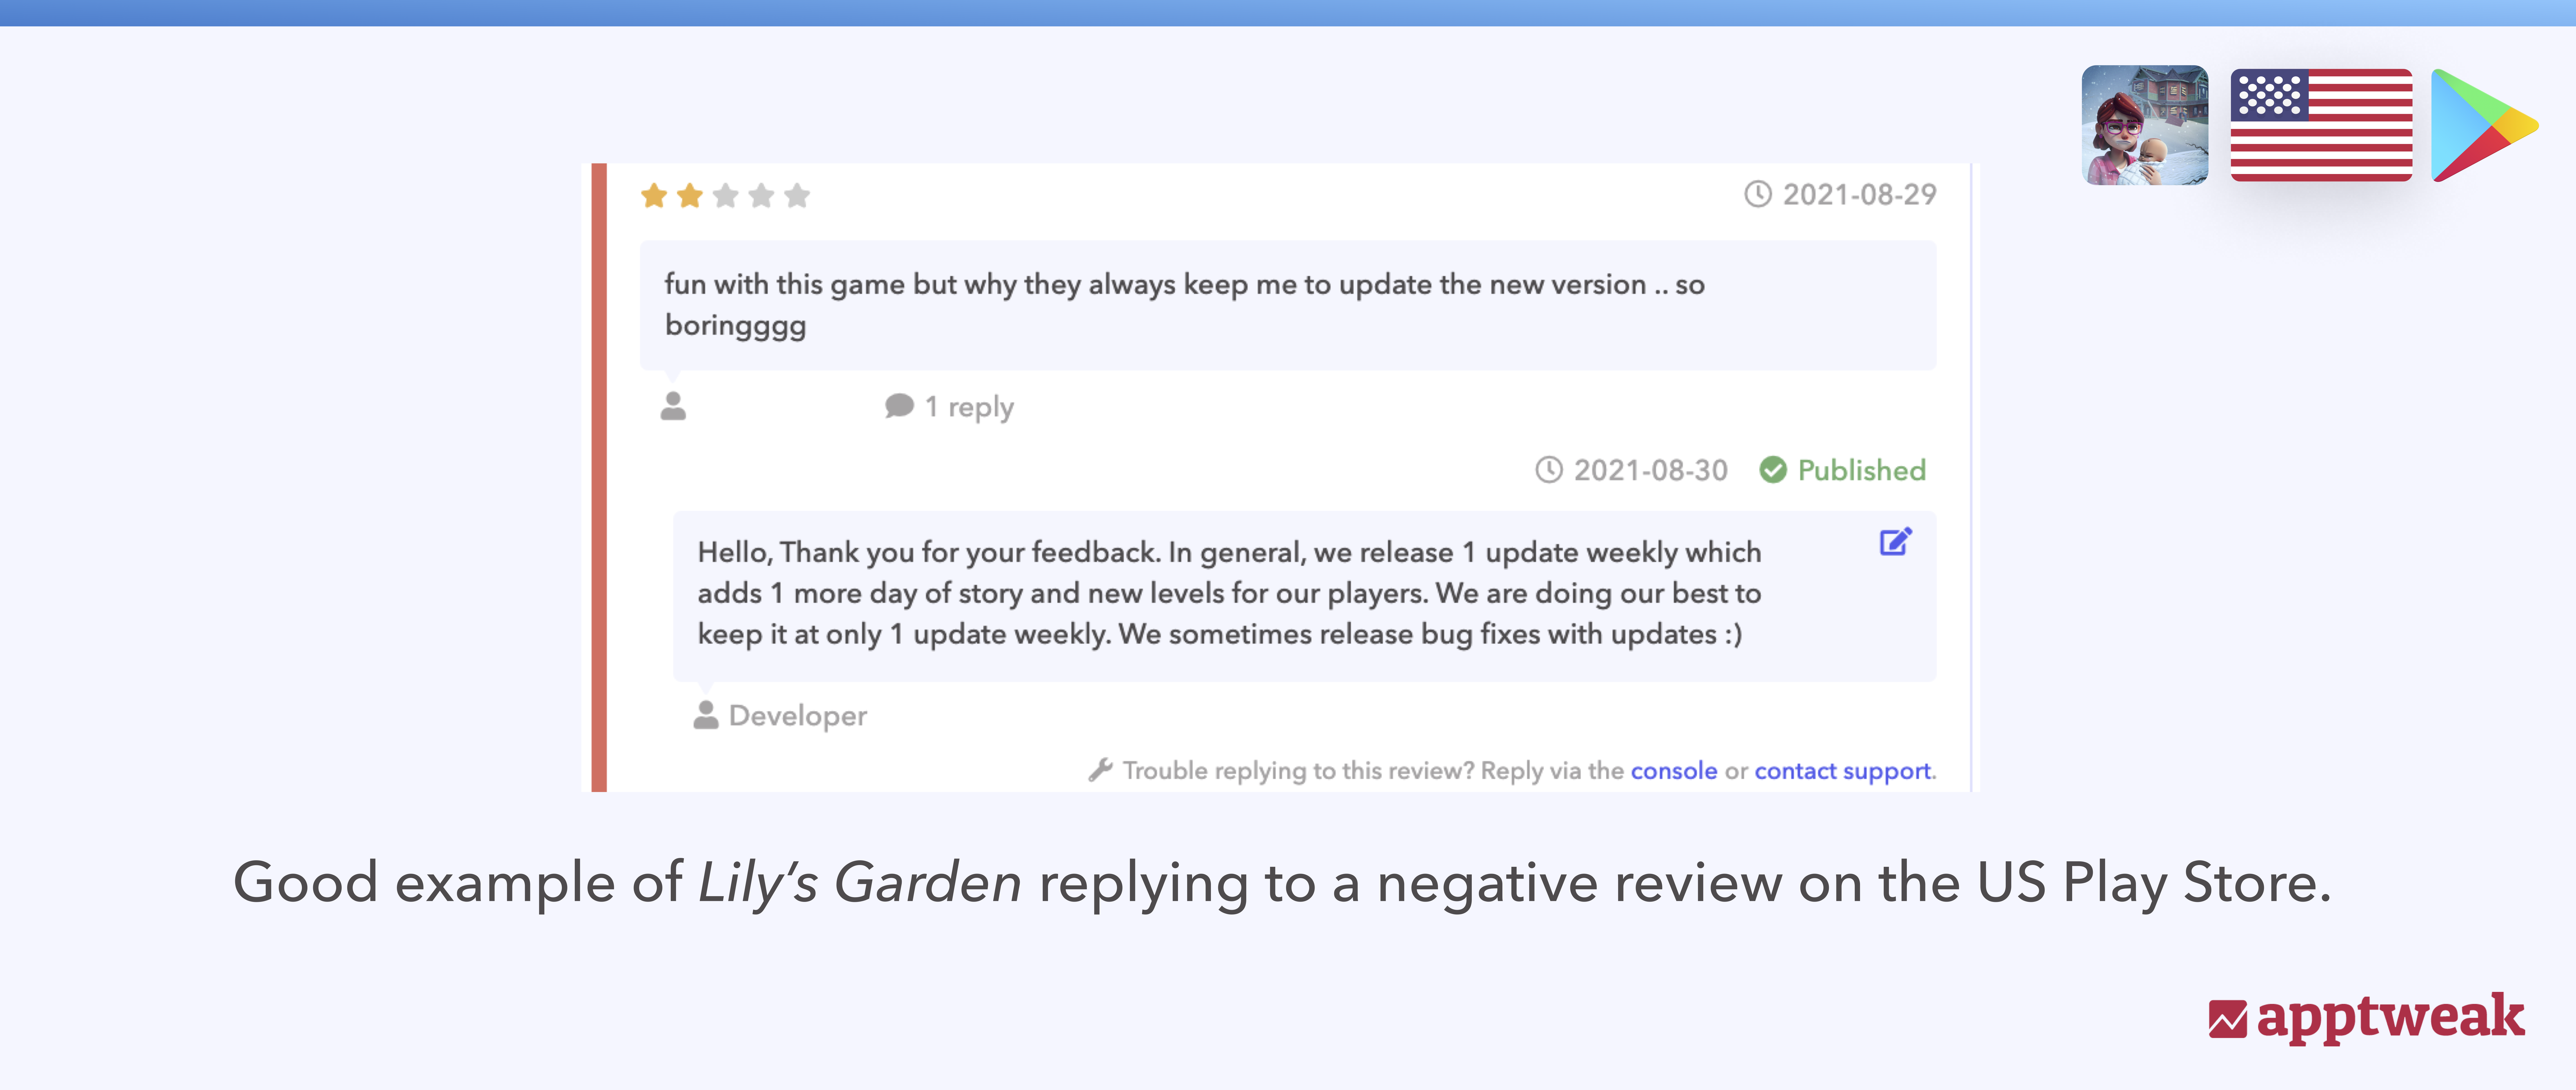 Good example of Lily's Garden replying to a negative review